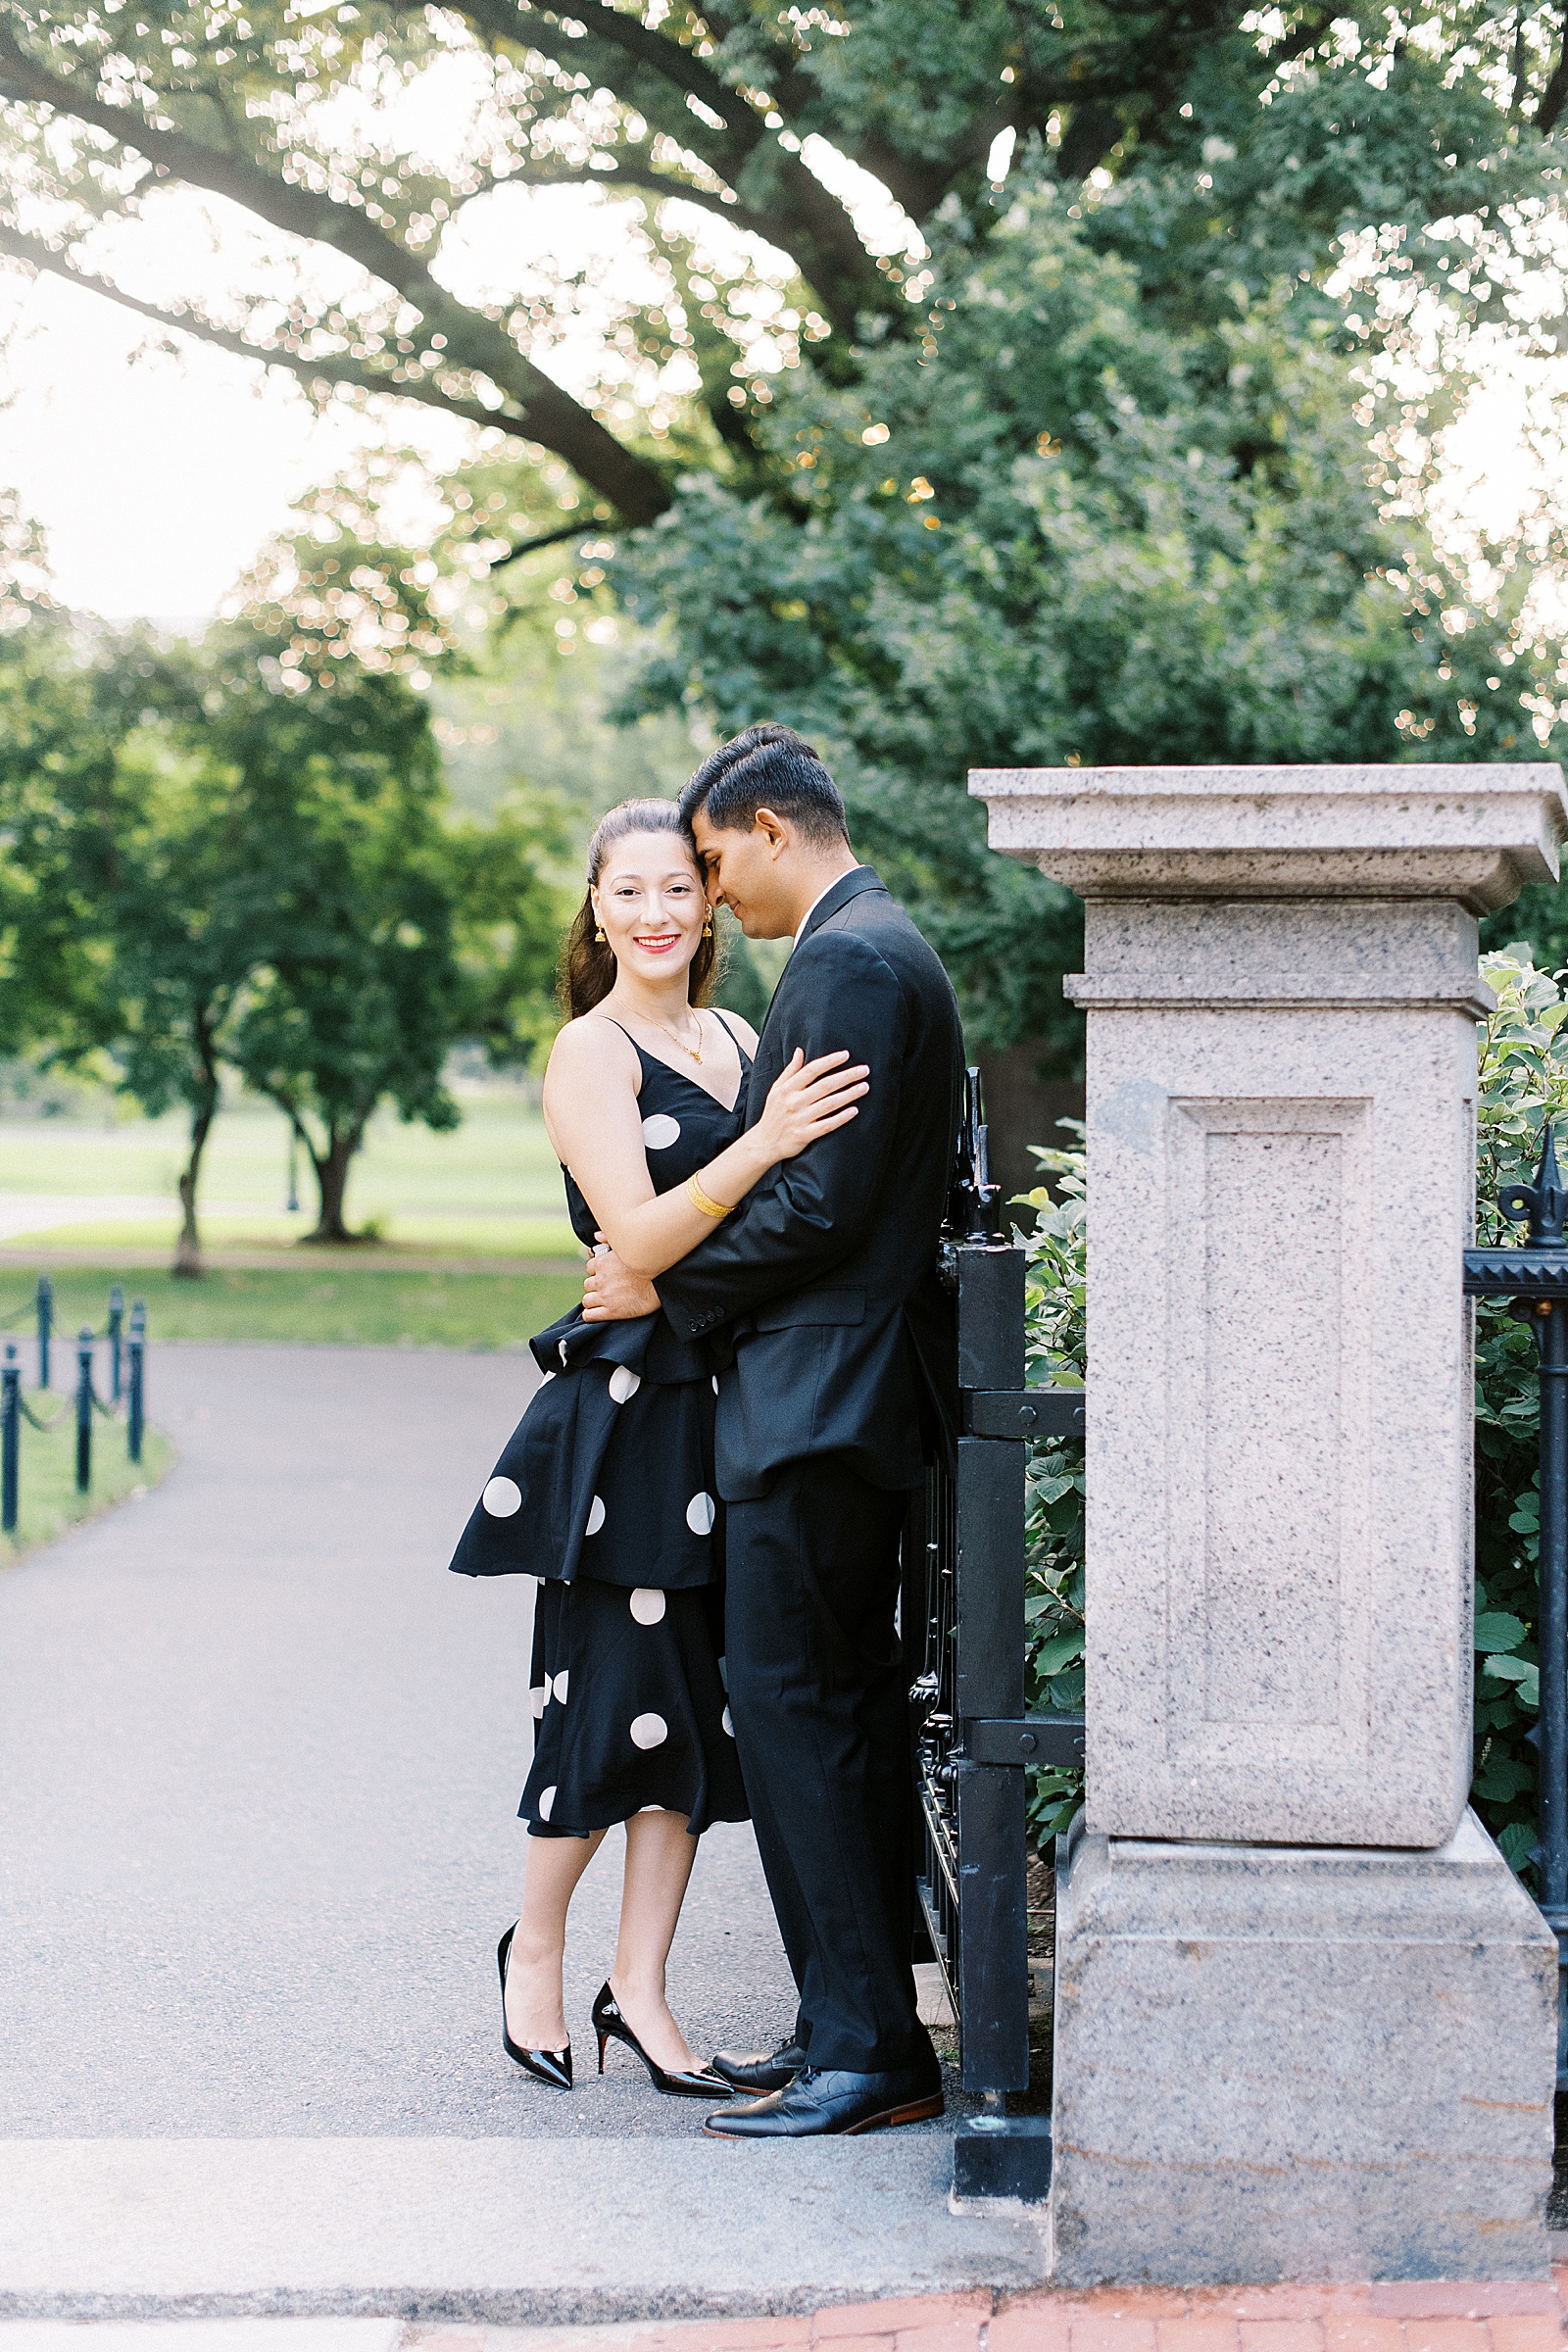 Man leaning into woman next to park gate by Boston wedding photographer